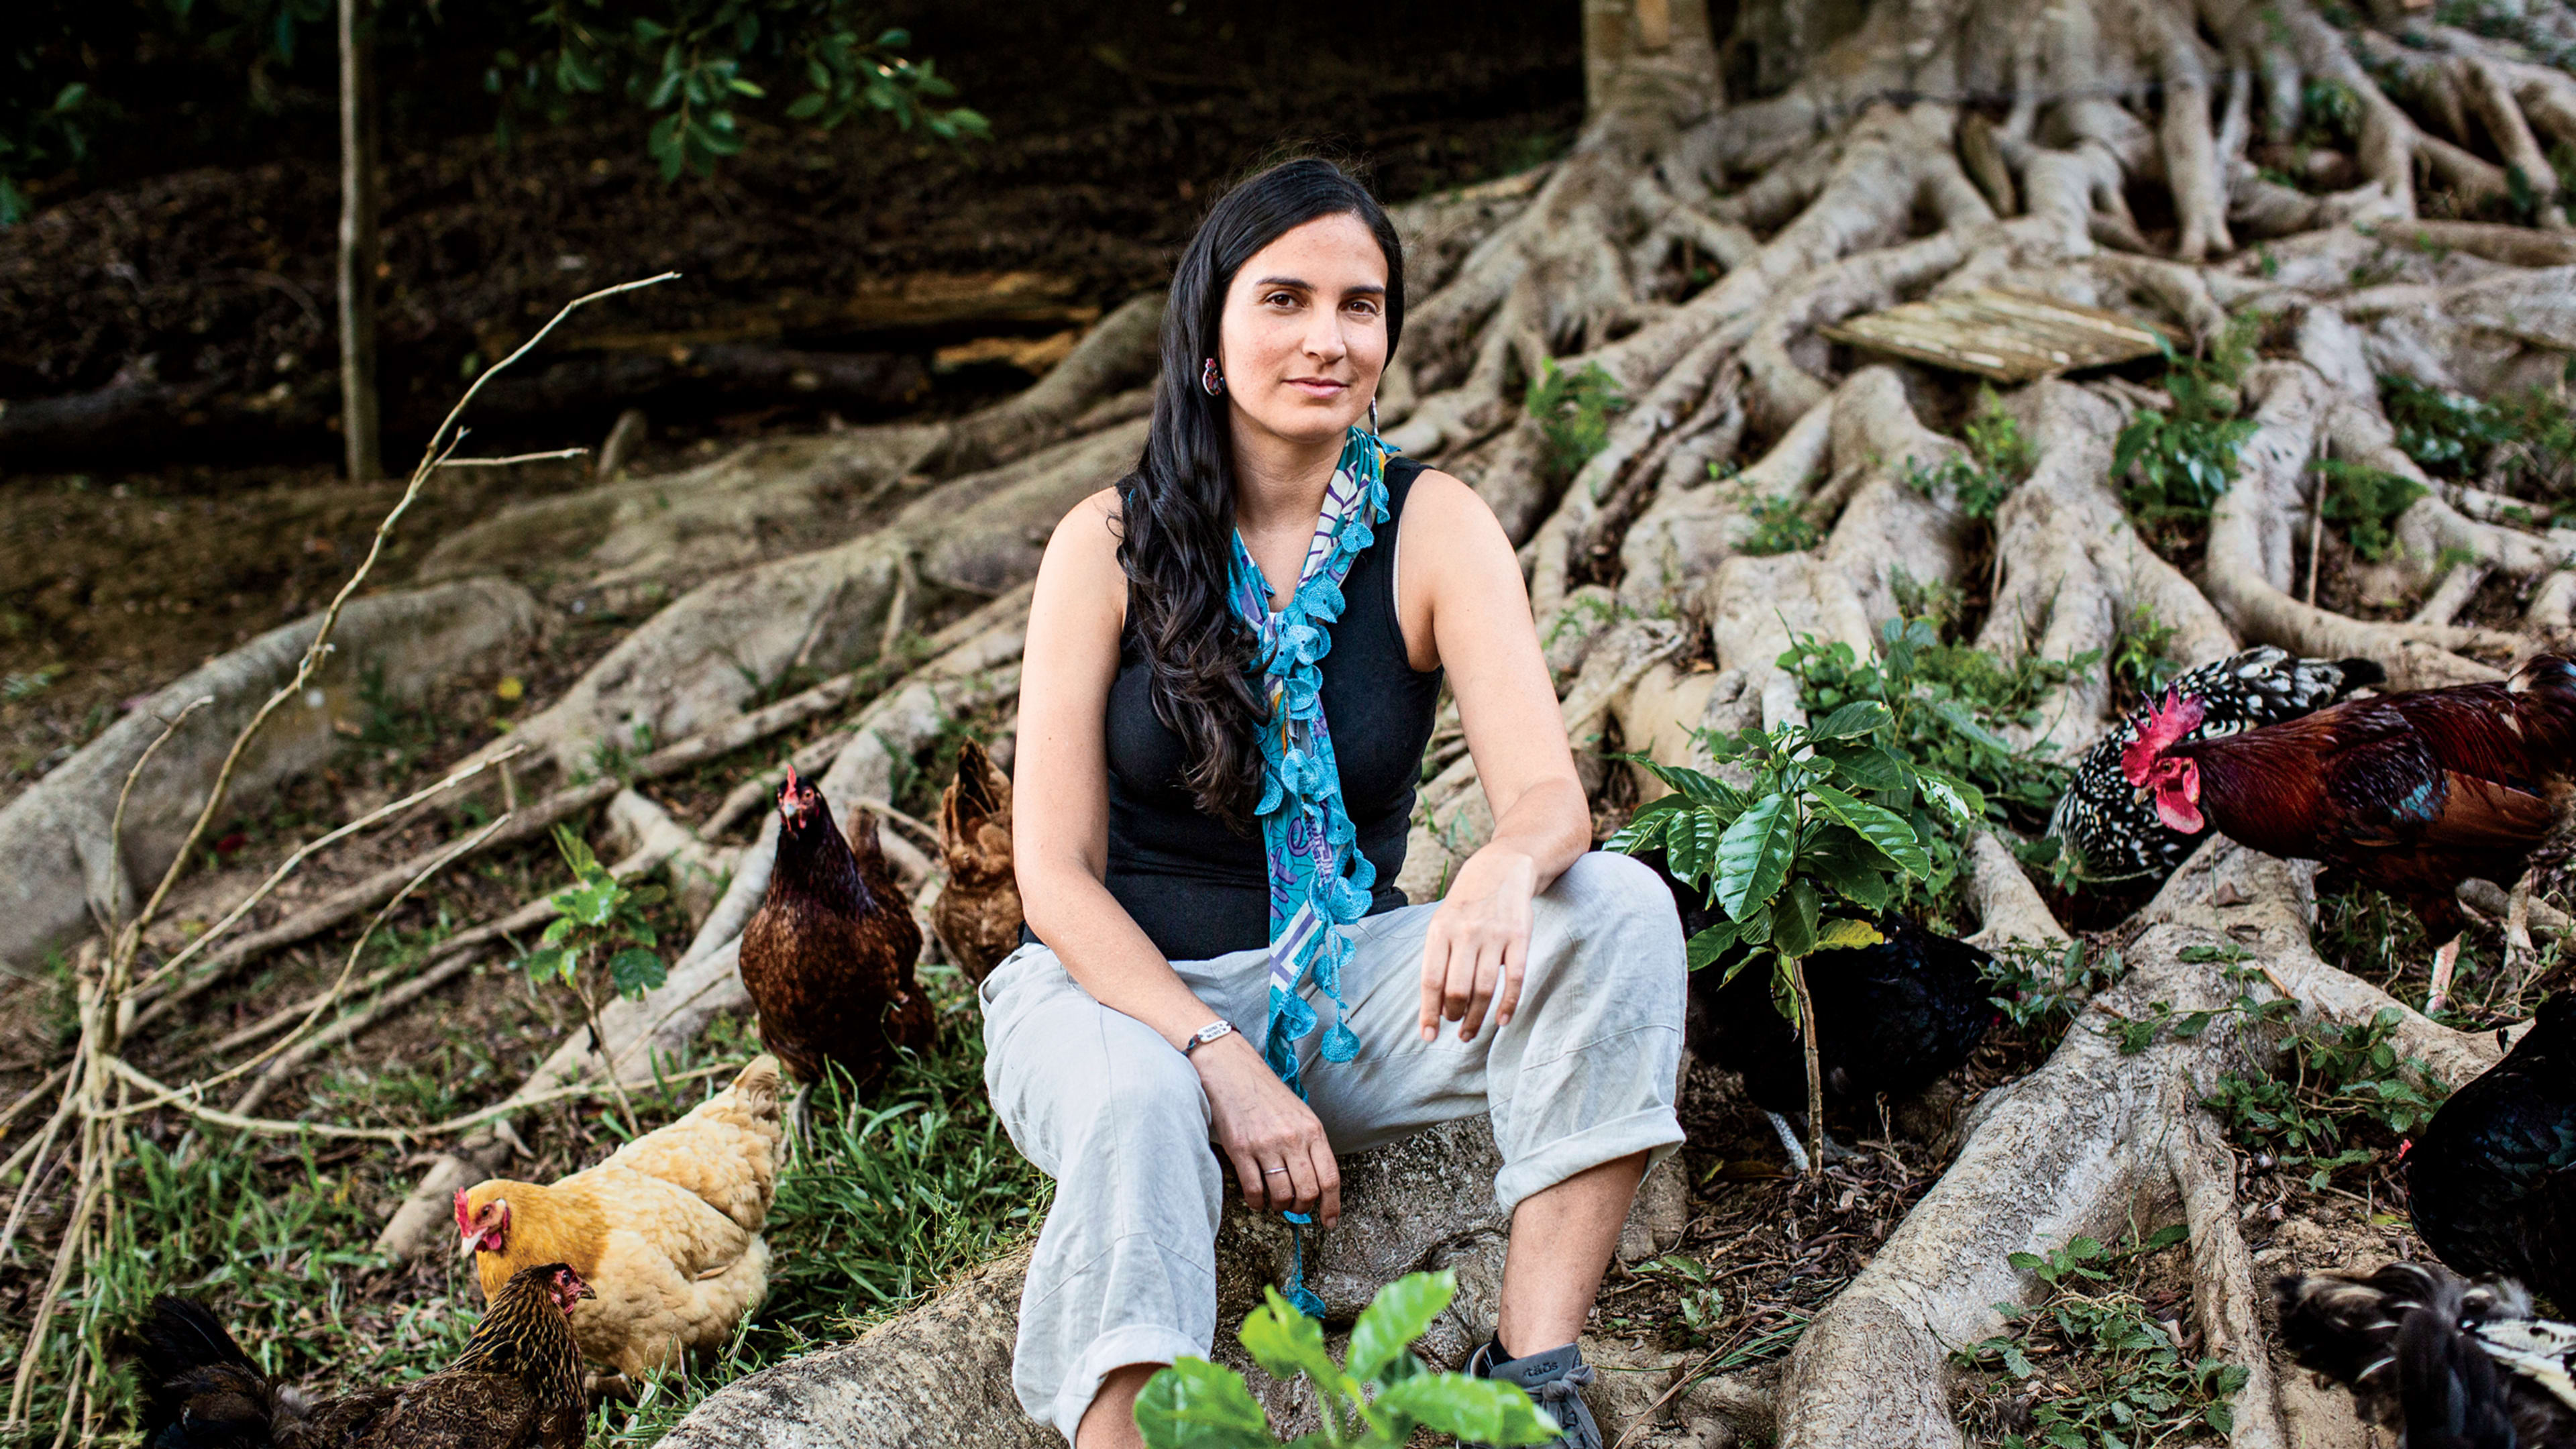 This local woman’s app is delivering Puerto Ricans fresh produce—and greater food sovereignty